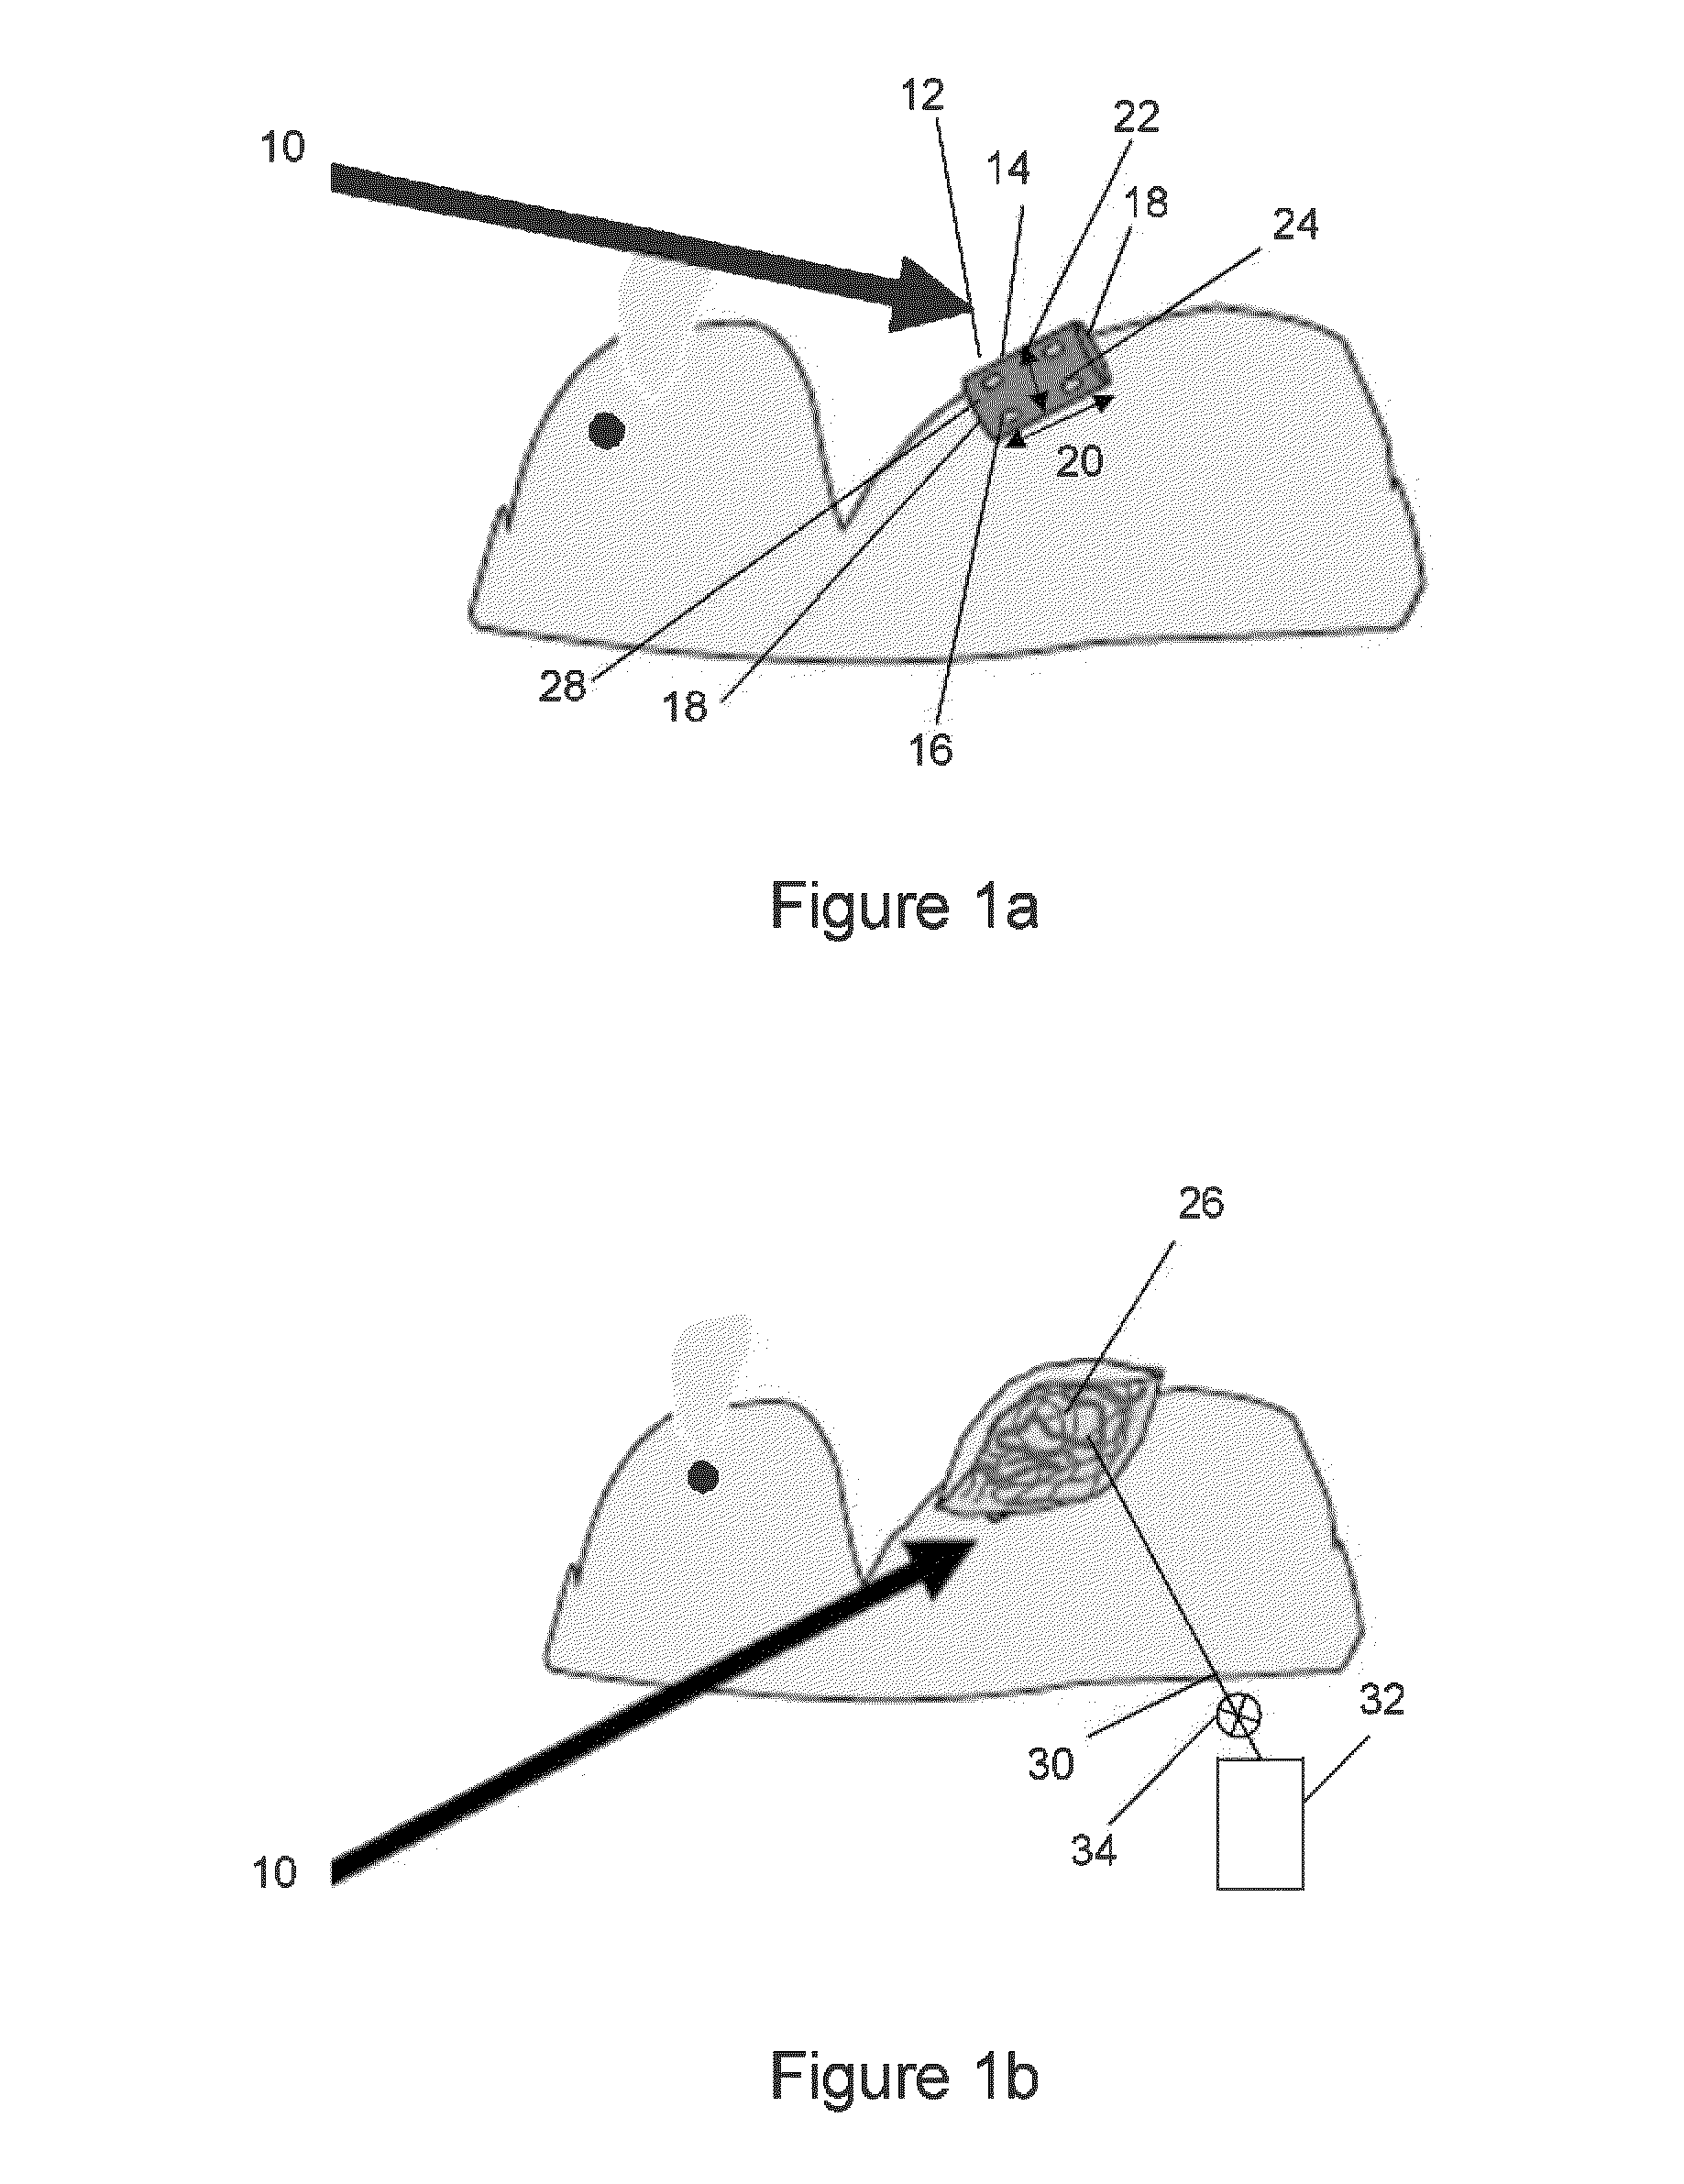 Fluid associated with adult stem cells for medical, cosmetic, and veterinary use